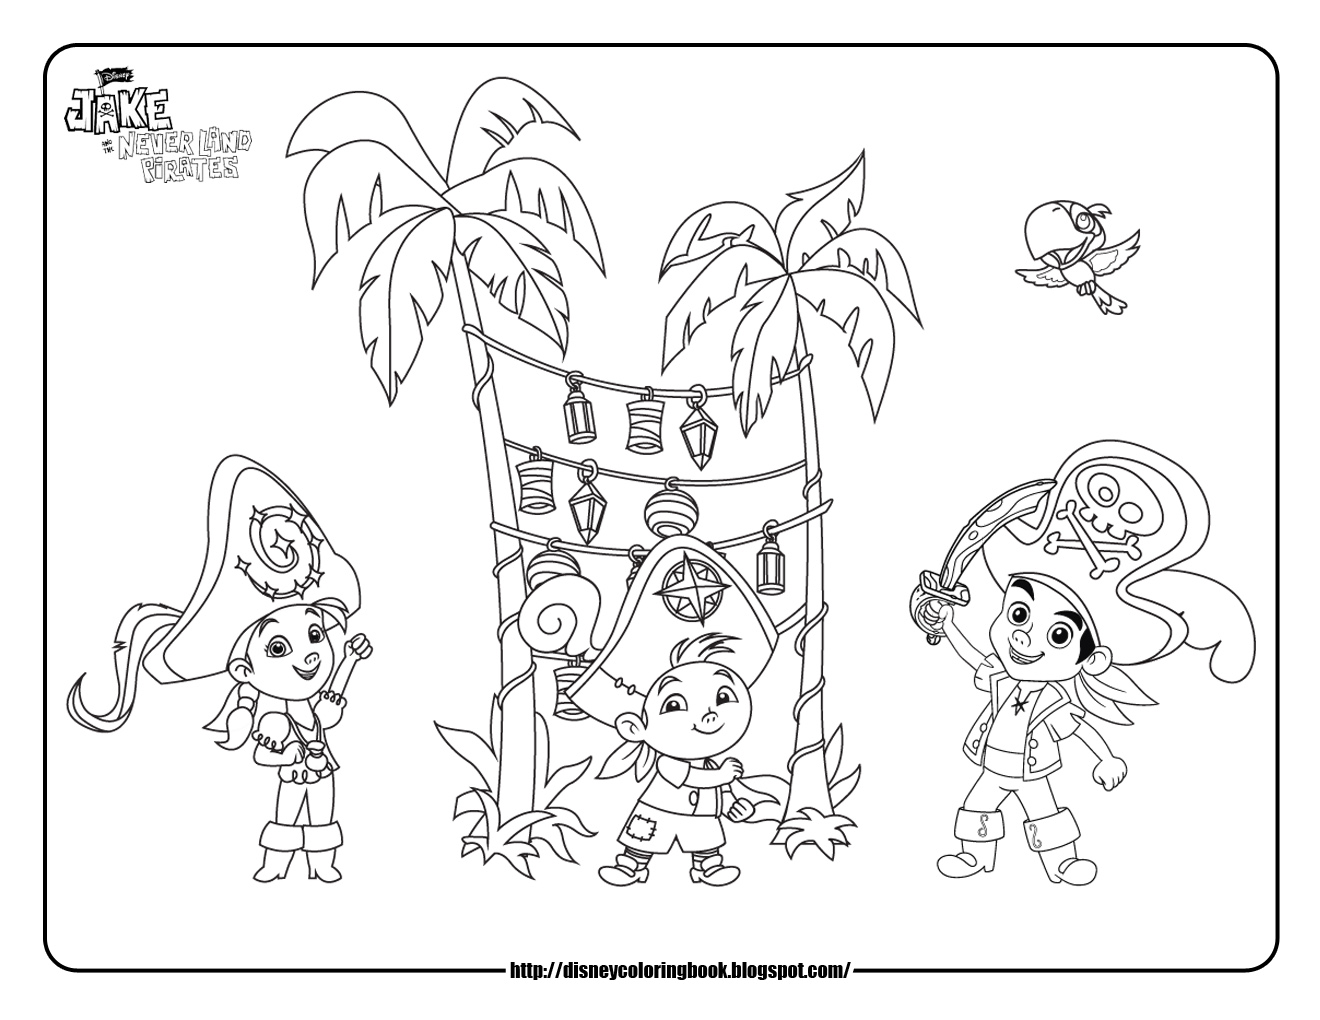 jack and the neverland pirates coloring pages - photo #28